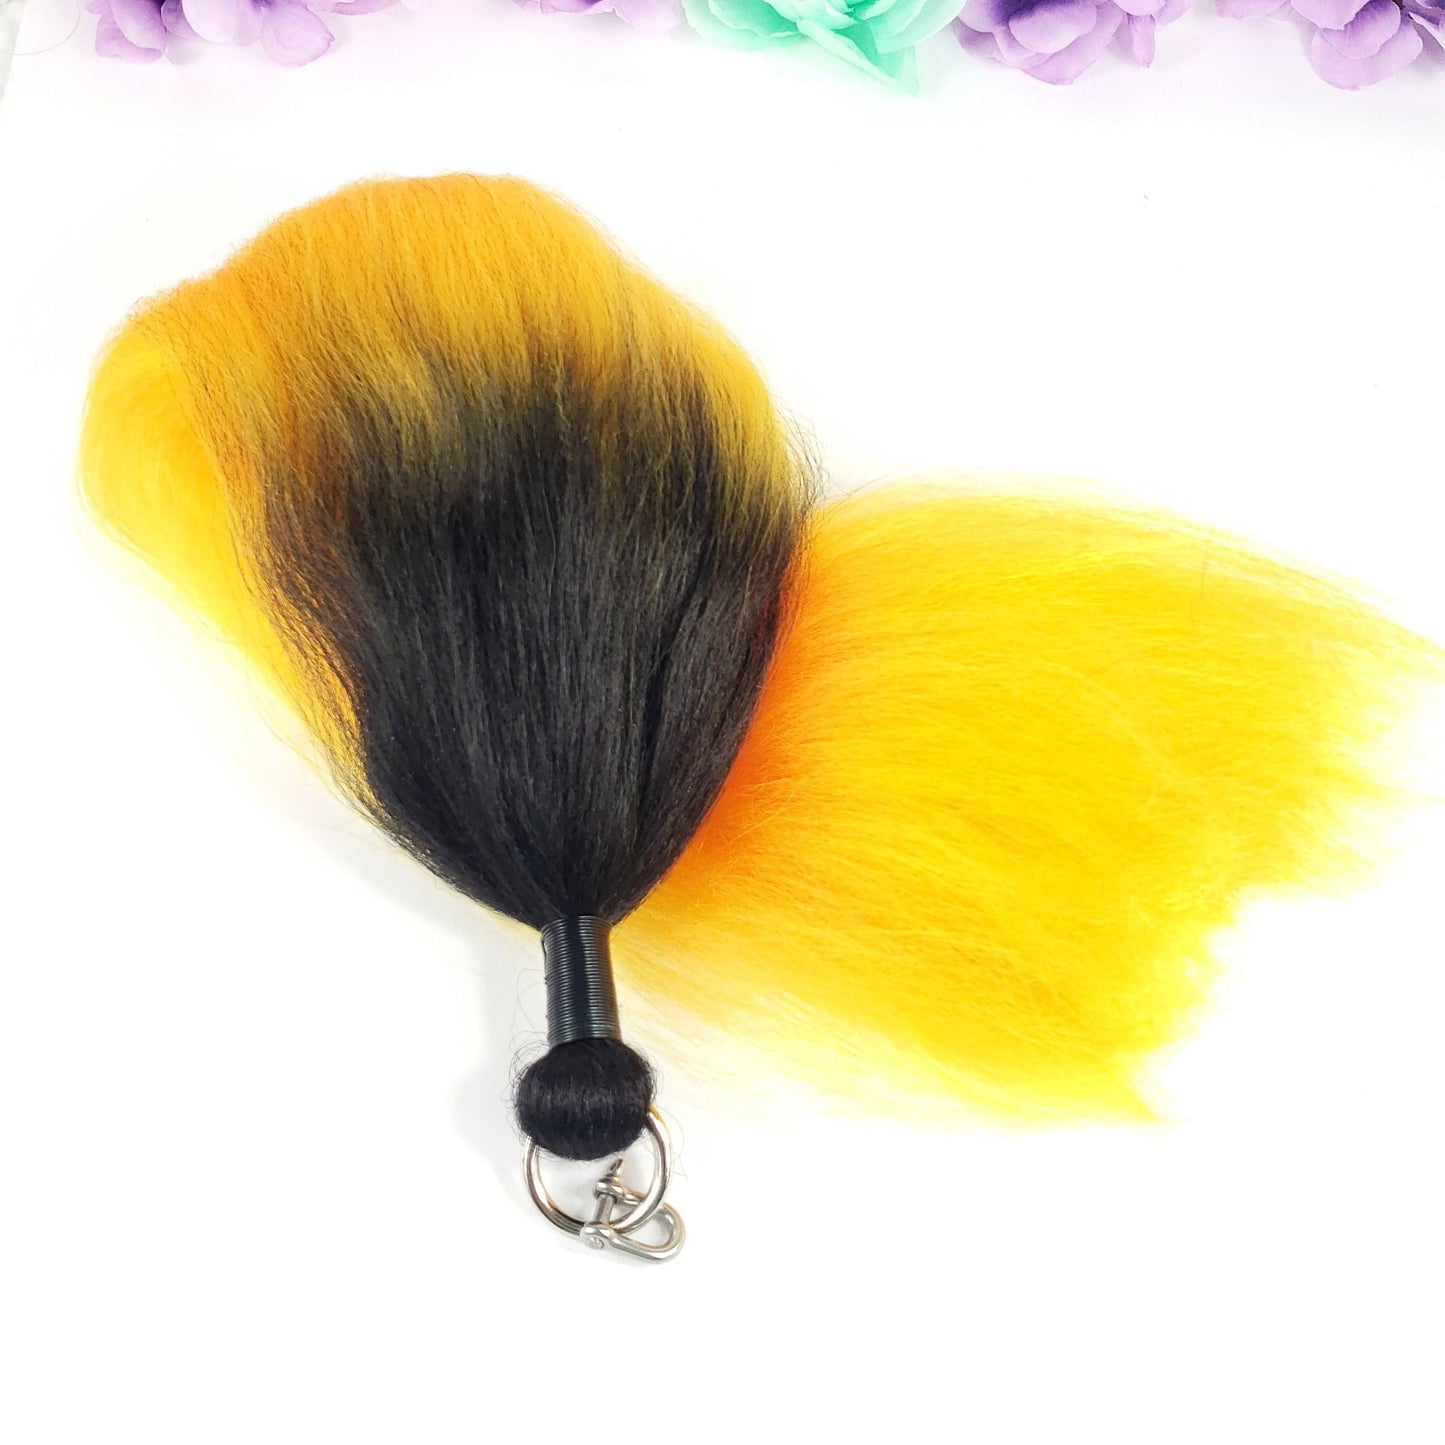 Yellow Ombre Pony Play Tail